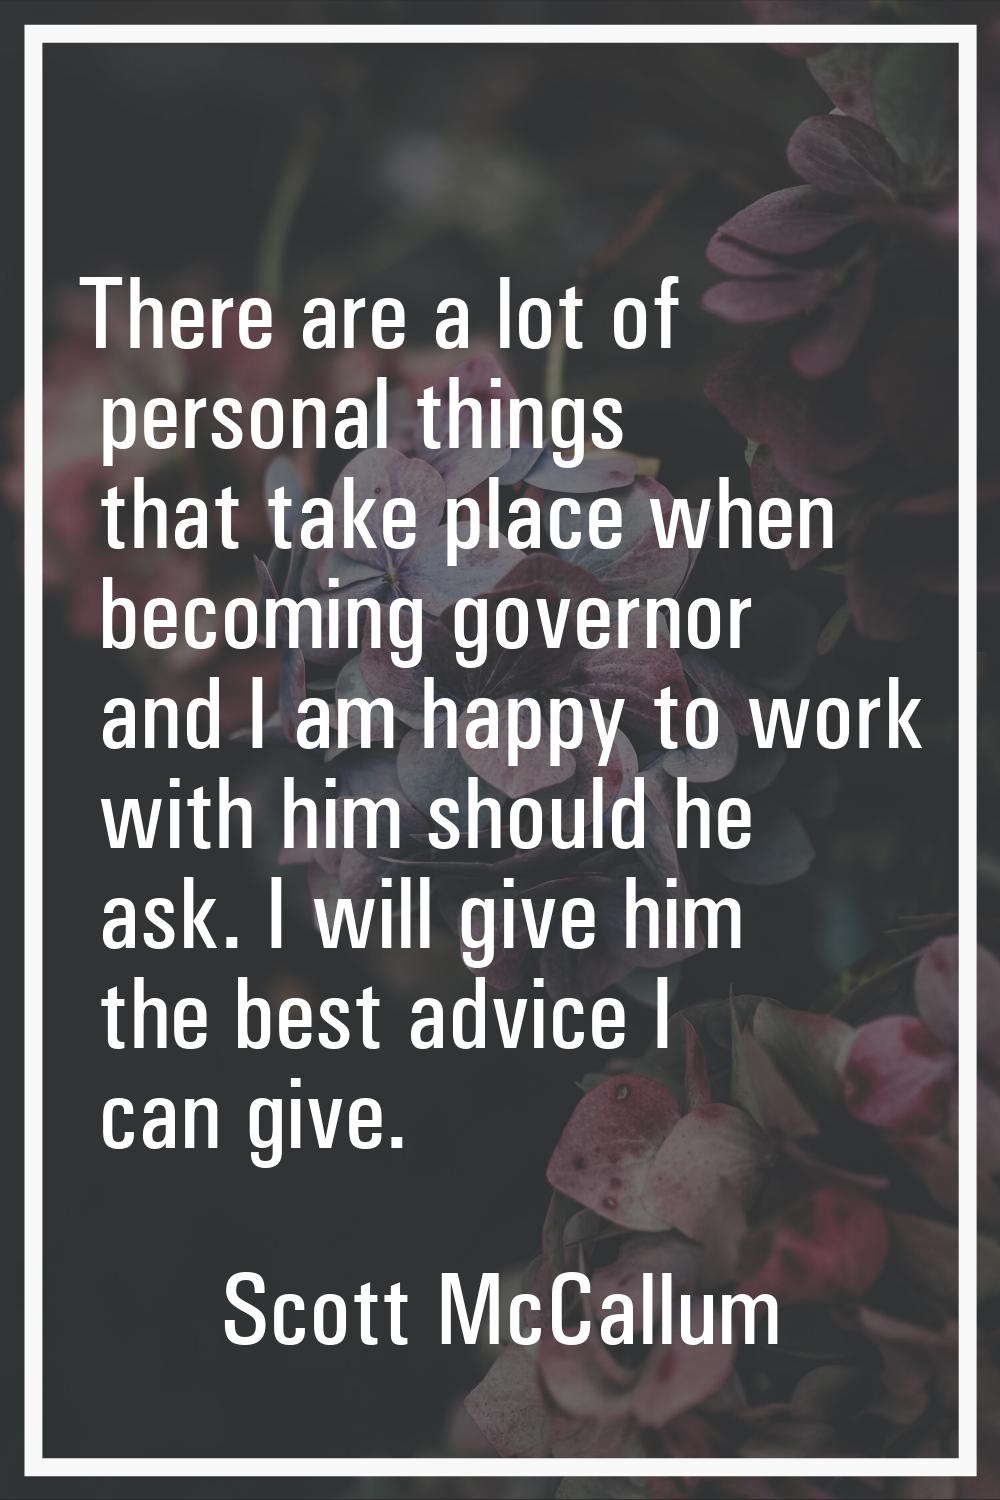 There are a lot of personal things that take place when becoming governor and I am happy to work wi